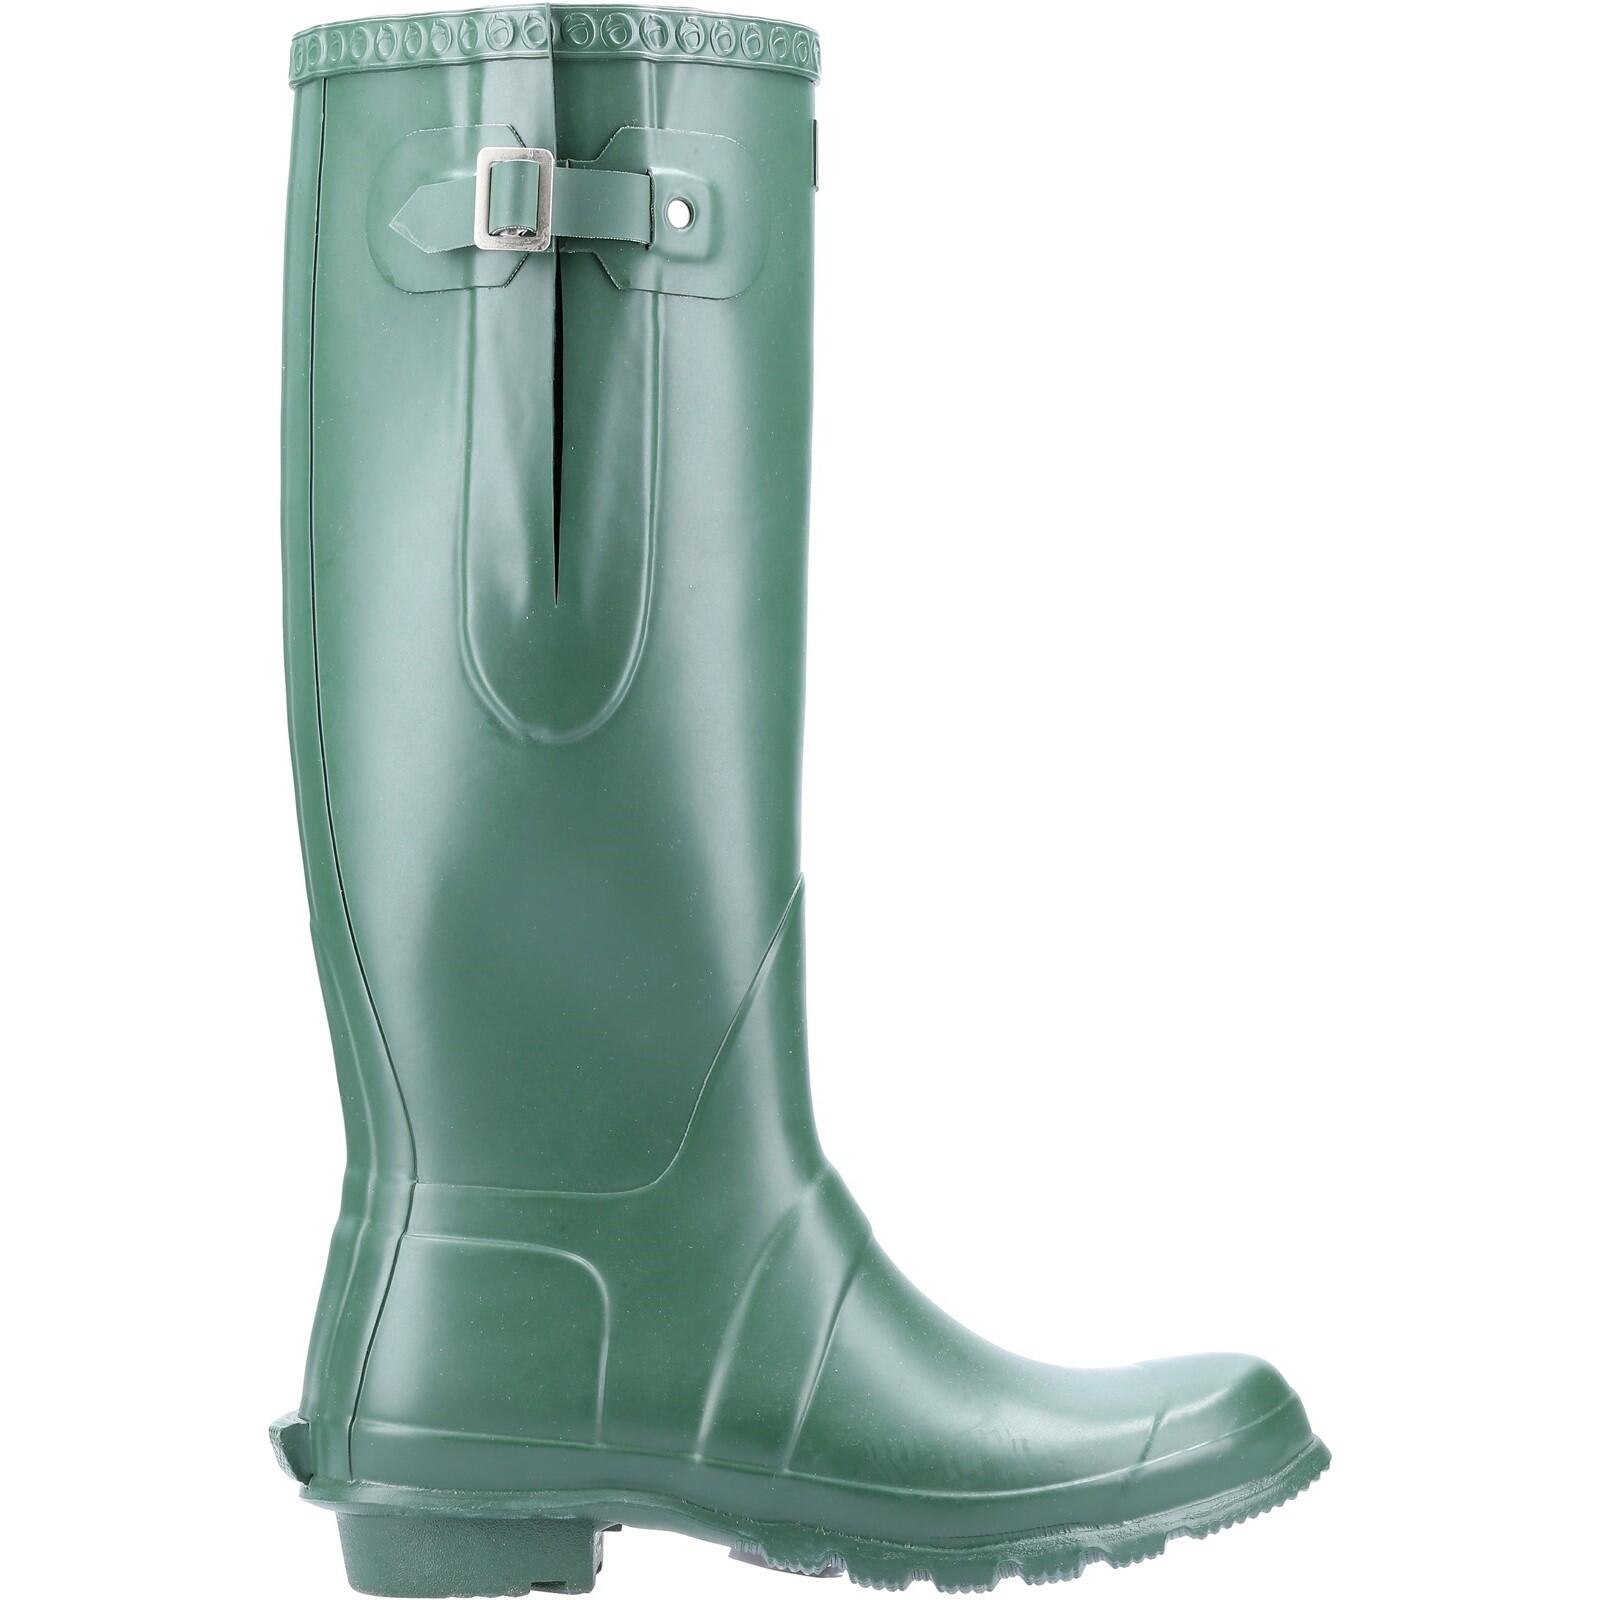 COTSWOLD Windsor Welly Plain Rubber Wellingtons GREEN